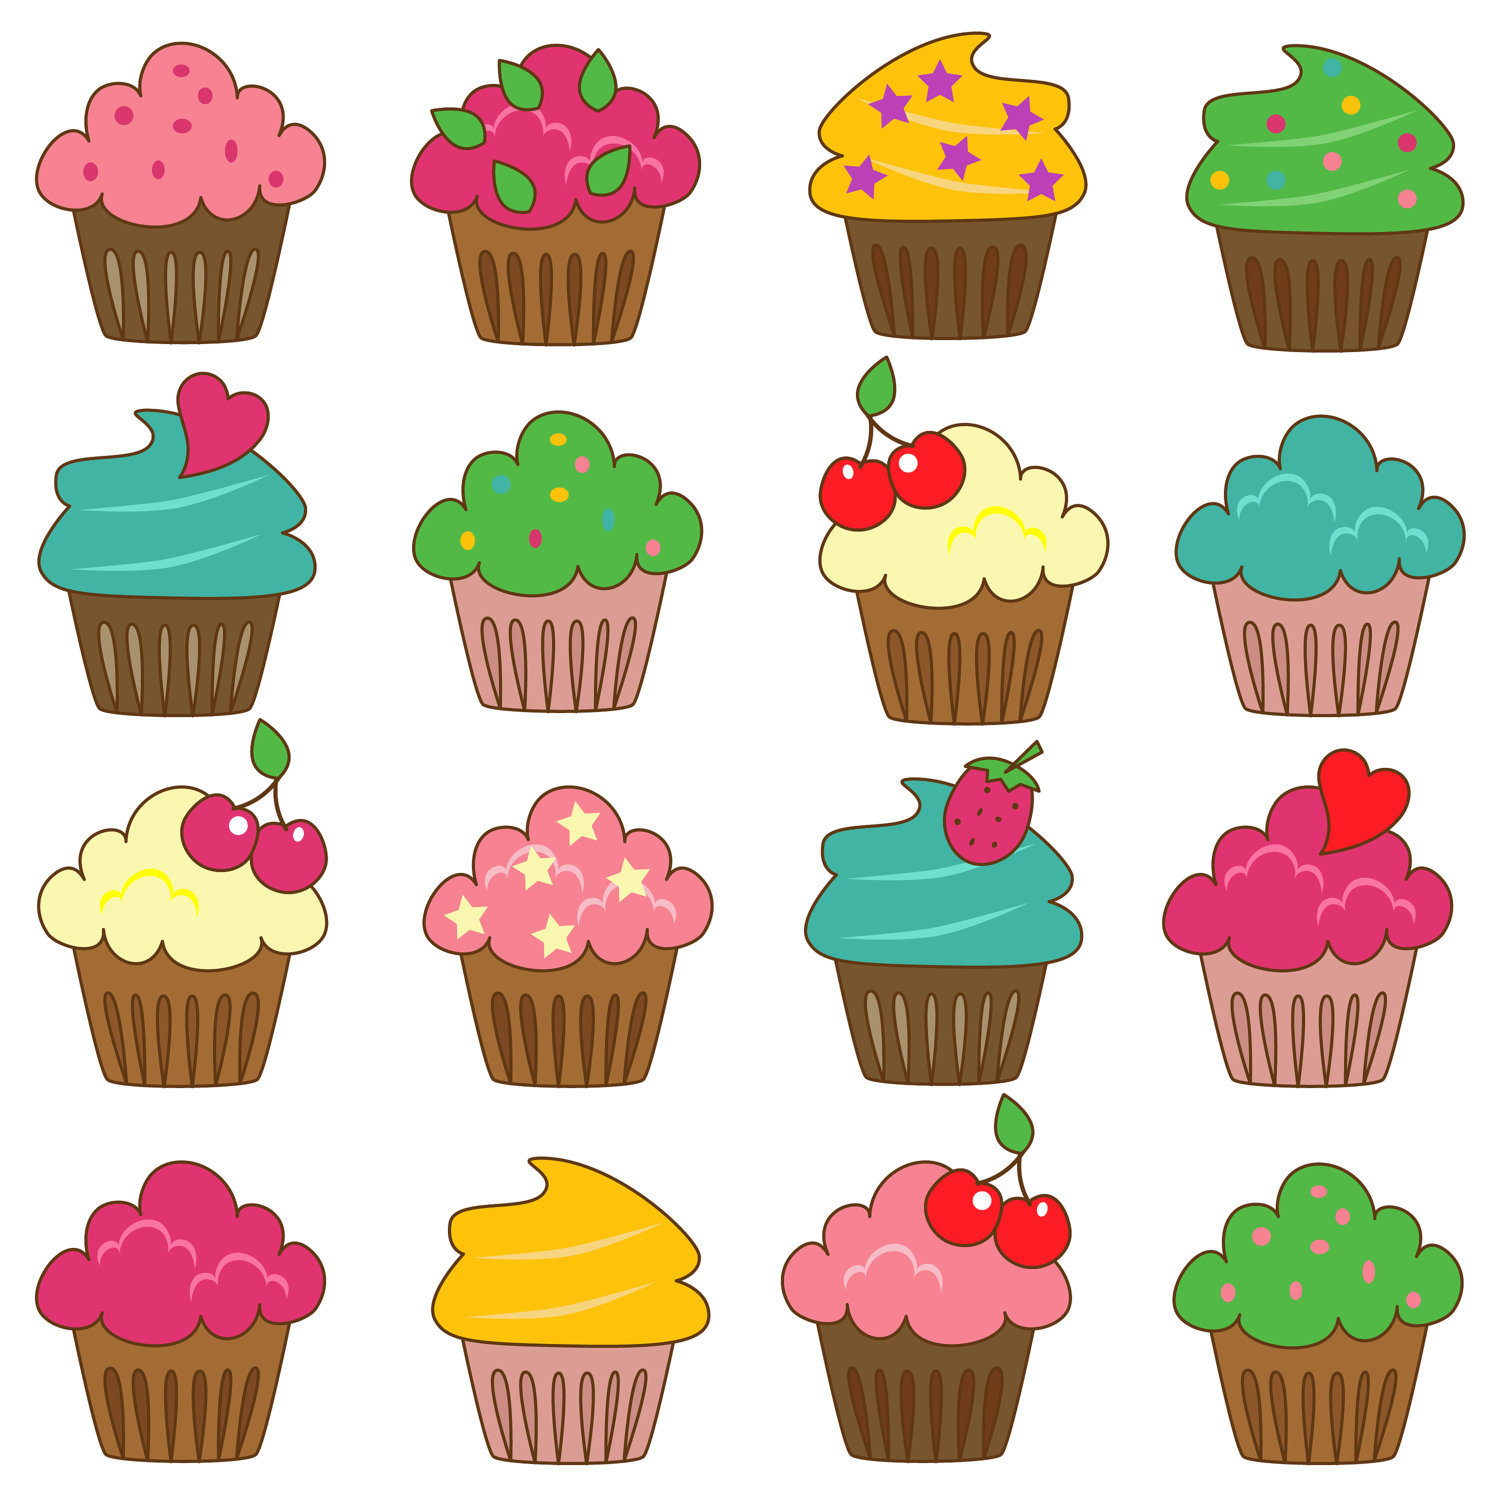 Orange Birthday Cupcake Clip Art | Clipart library - Free Clipart Images